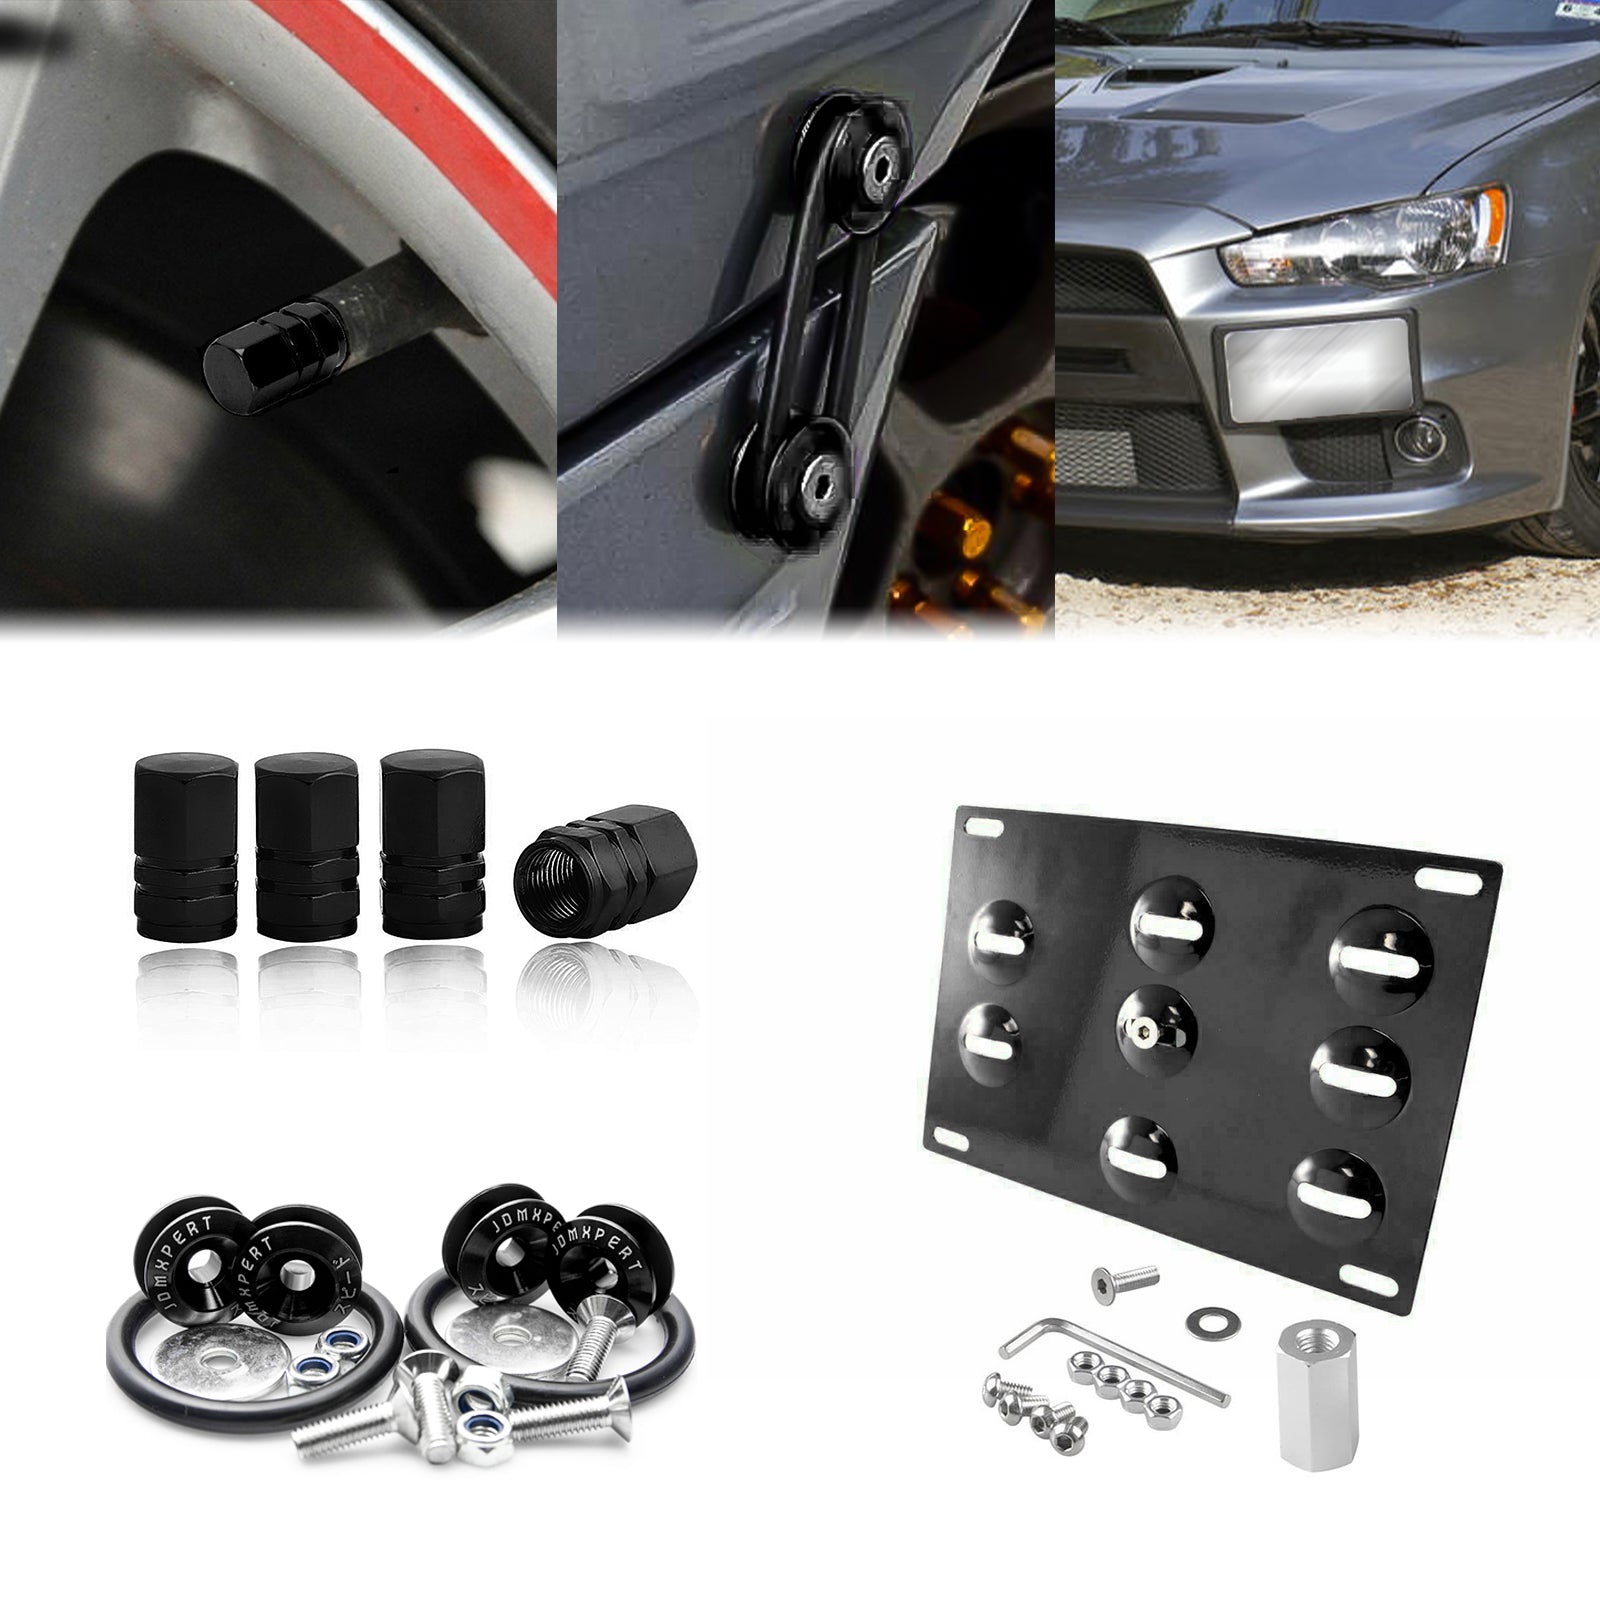 Set Tow Hook License Plate + Air Valve + Release Fastener For Nissan 3